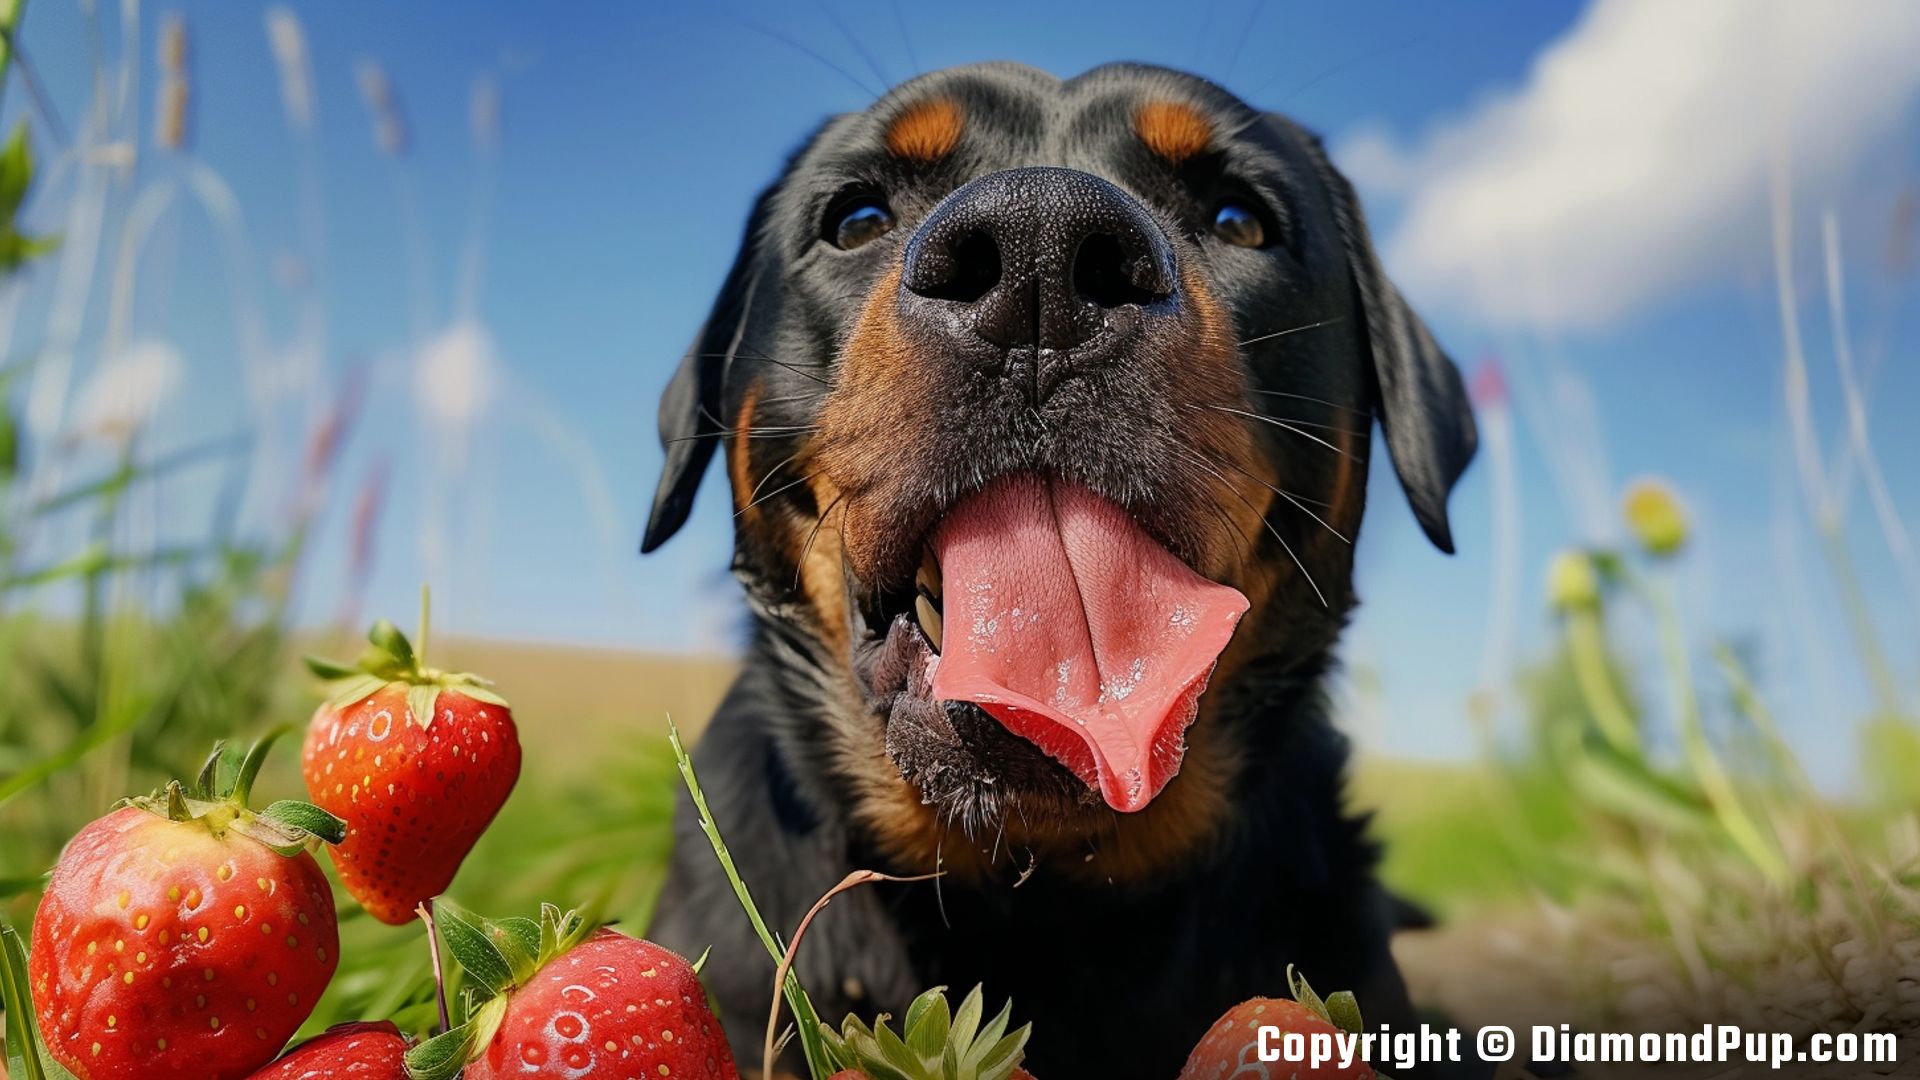 Photograph of an Adorable Rottweiler Eating Strawberries